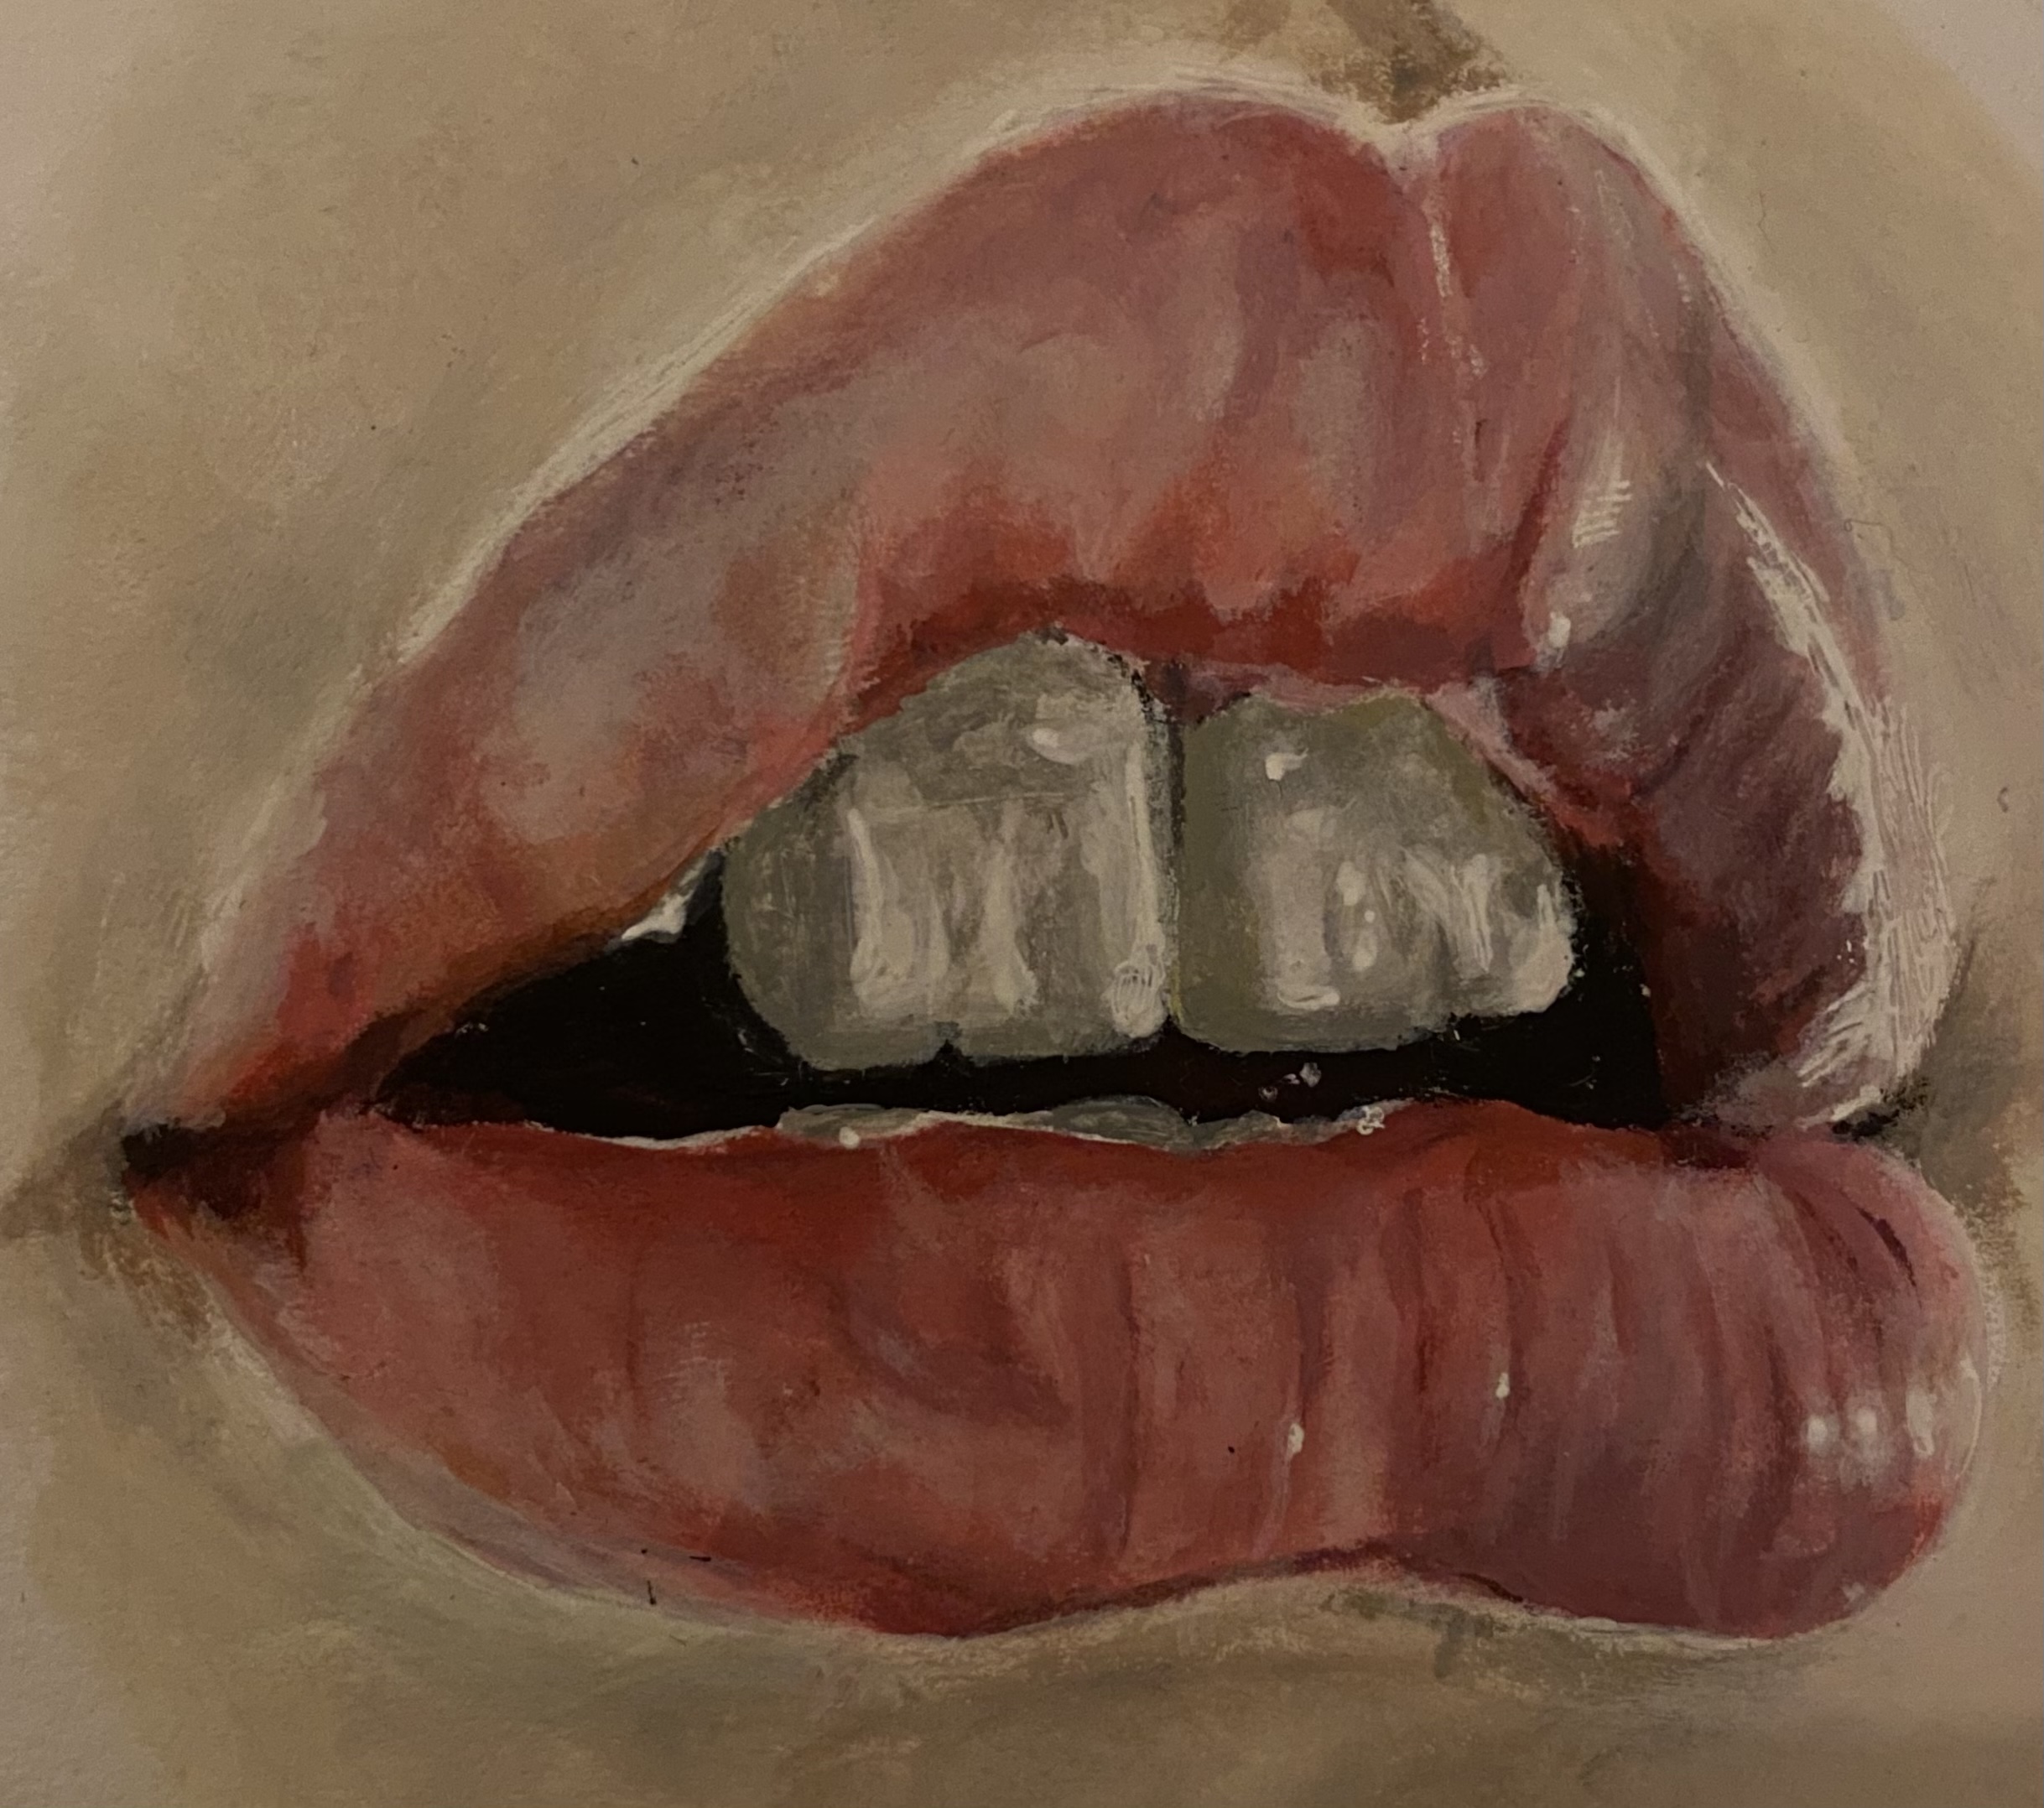 Acrylic lip painting from observation